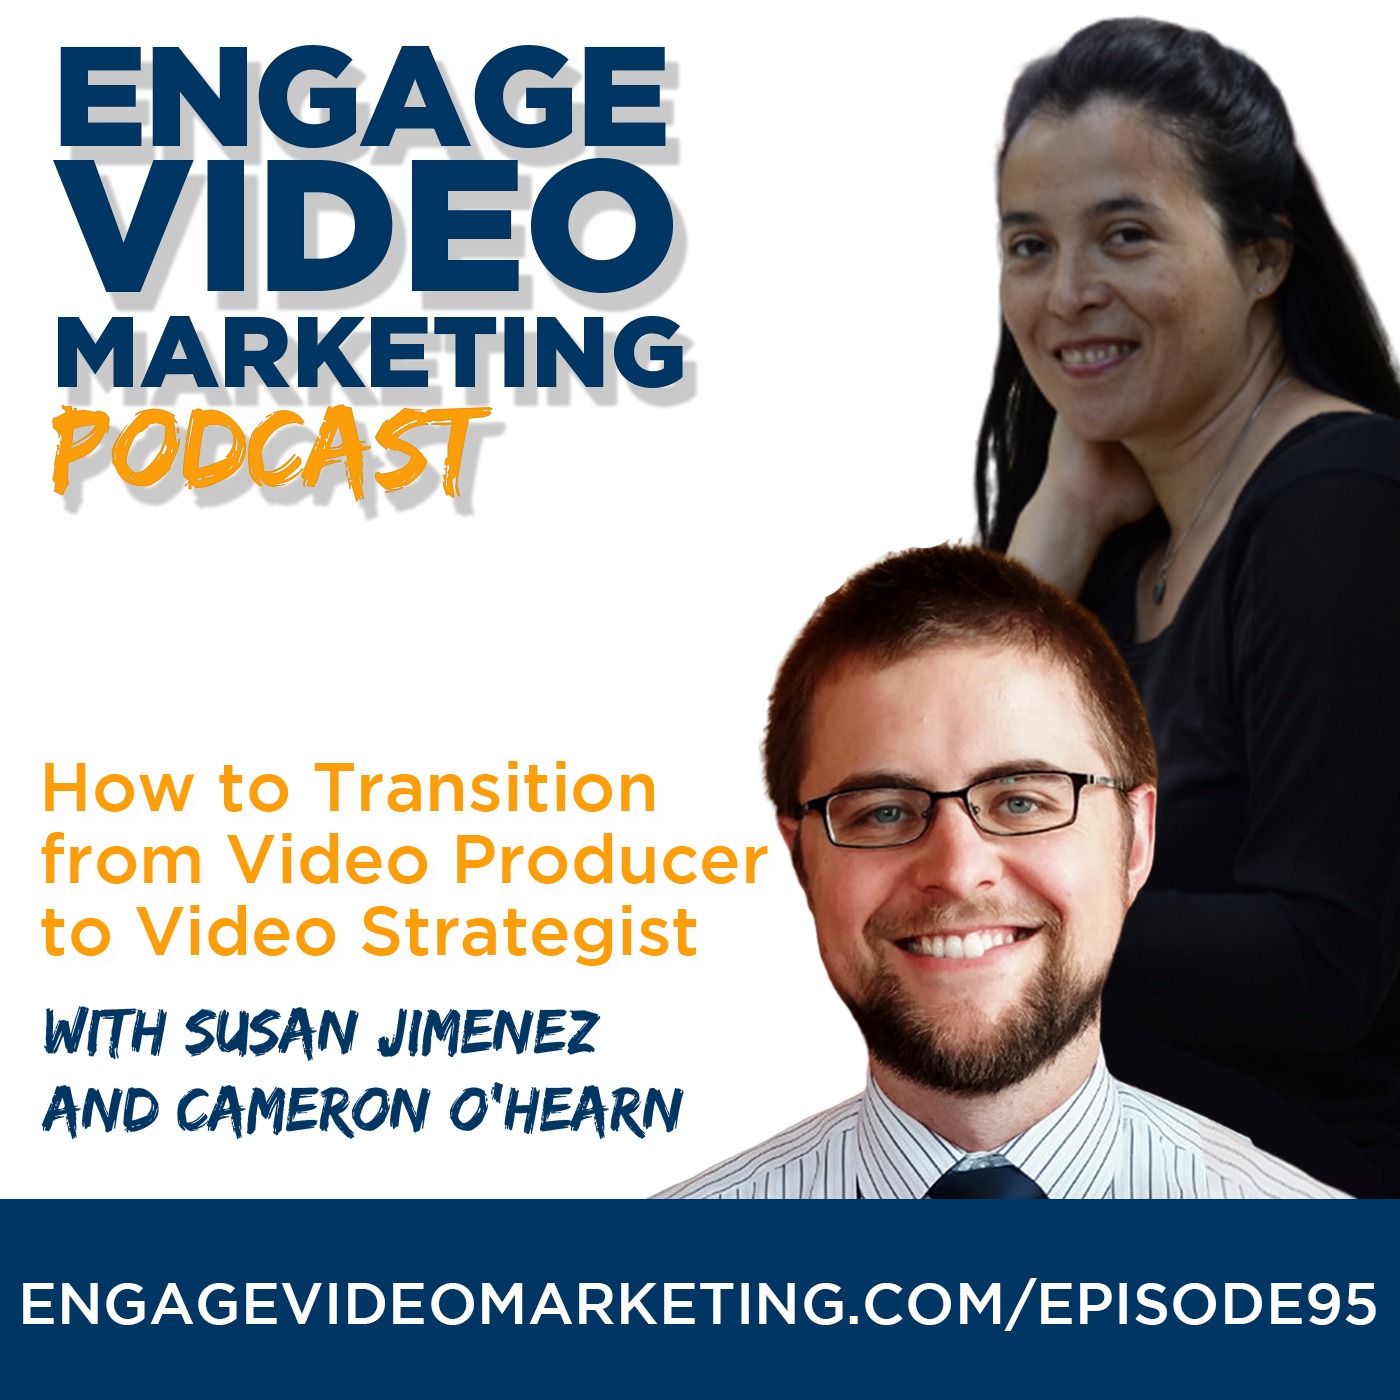 How to Transition from Video Producer to Video Strategist